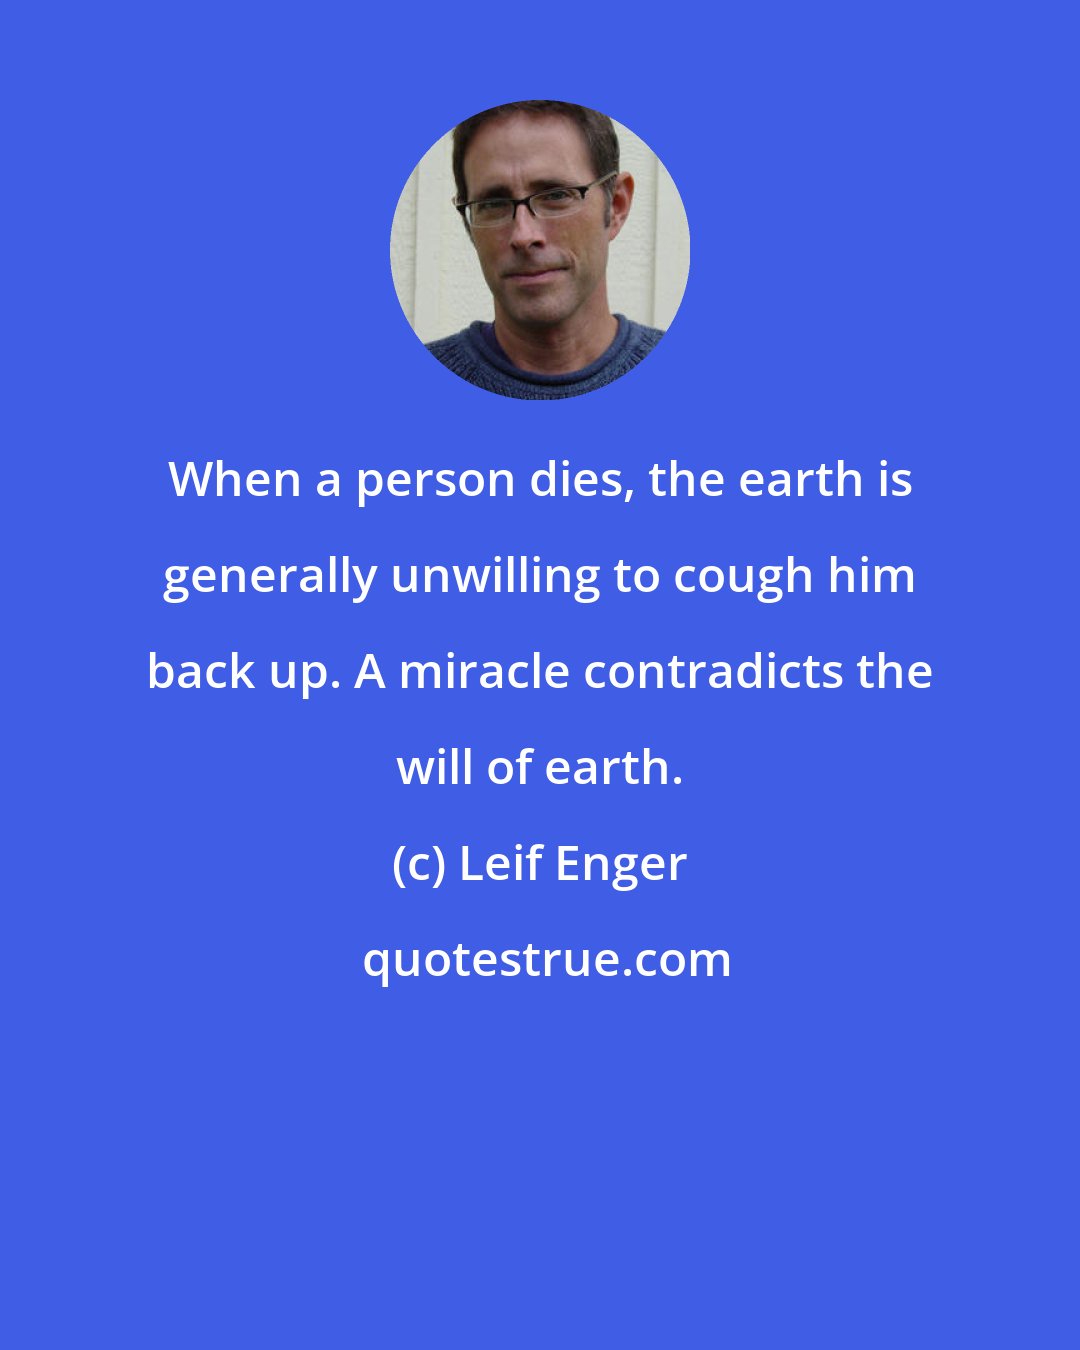 Leif Enger: When a person dies, the earth is generally unwilling to cough him back up. A miracle contradicts the will of earth.